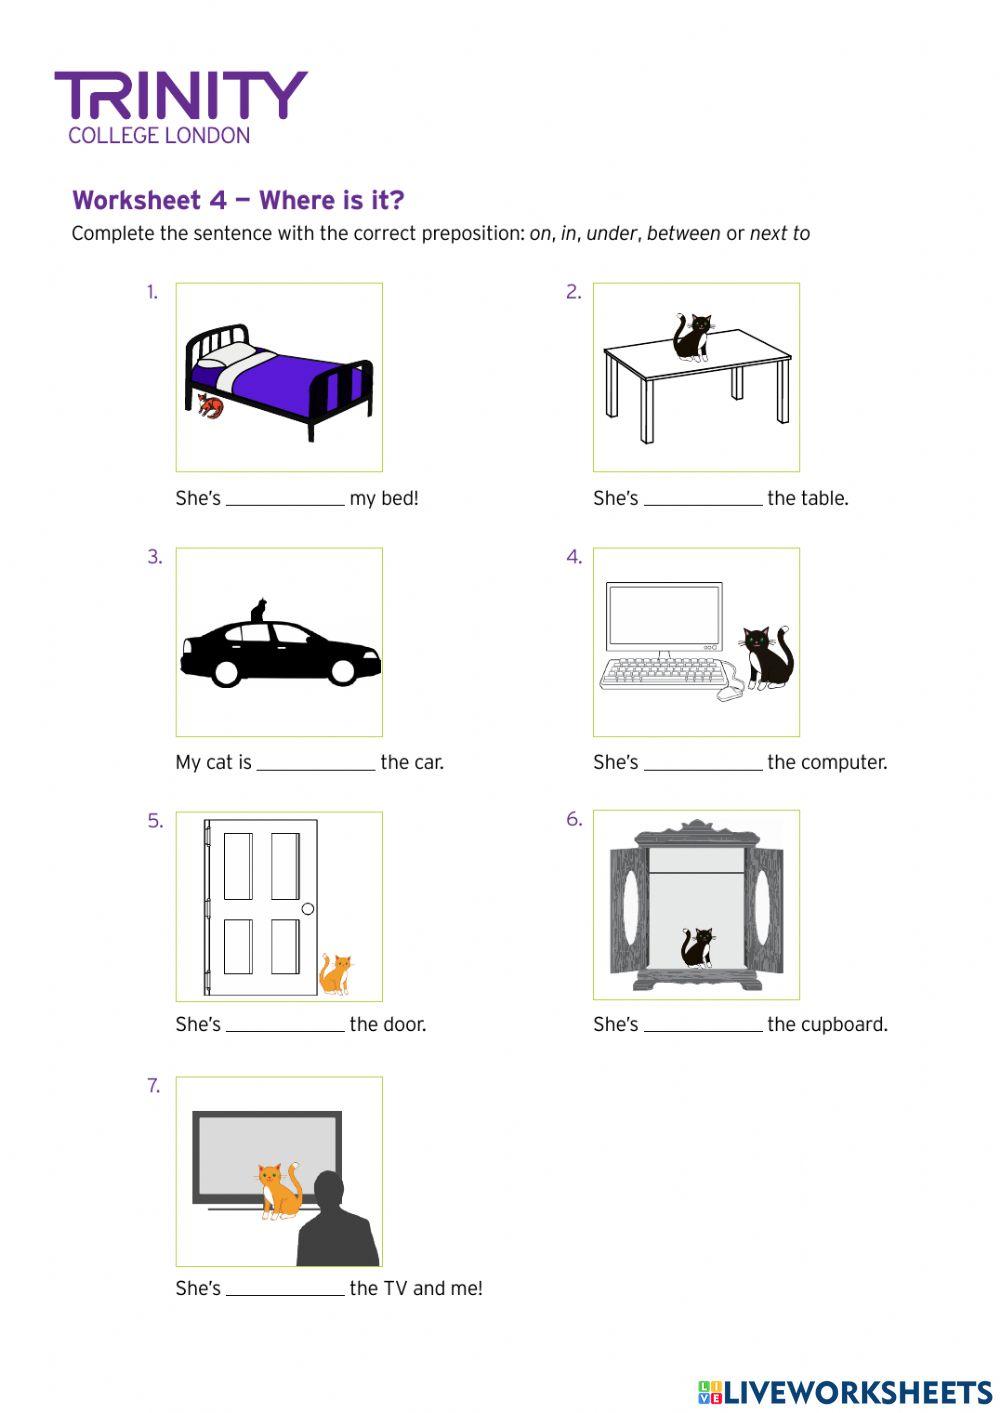 Place Preposition with pets and hosuehold objects